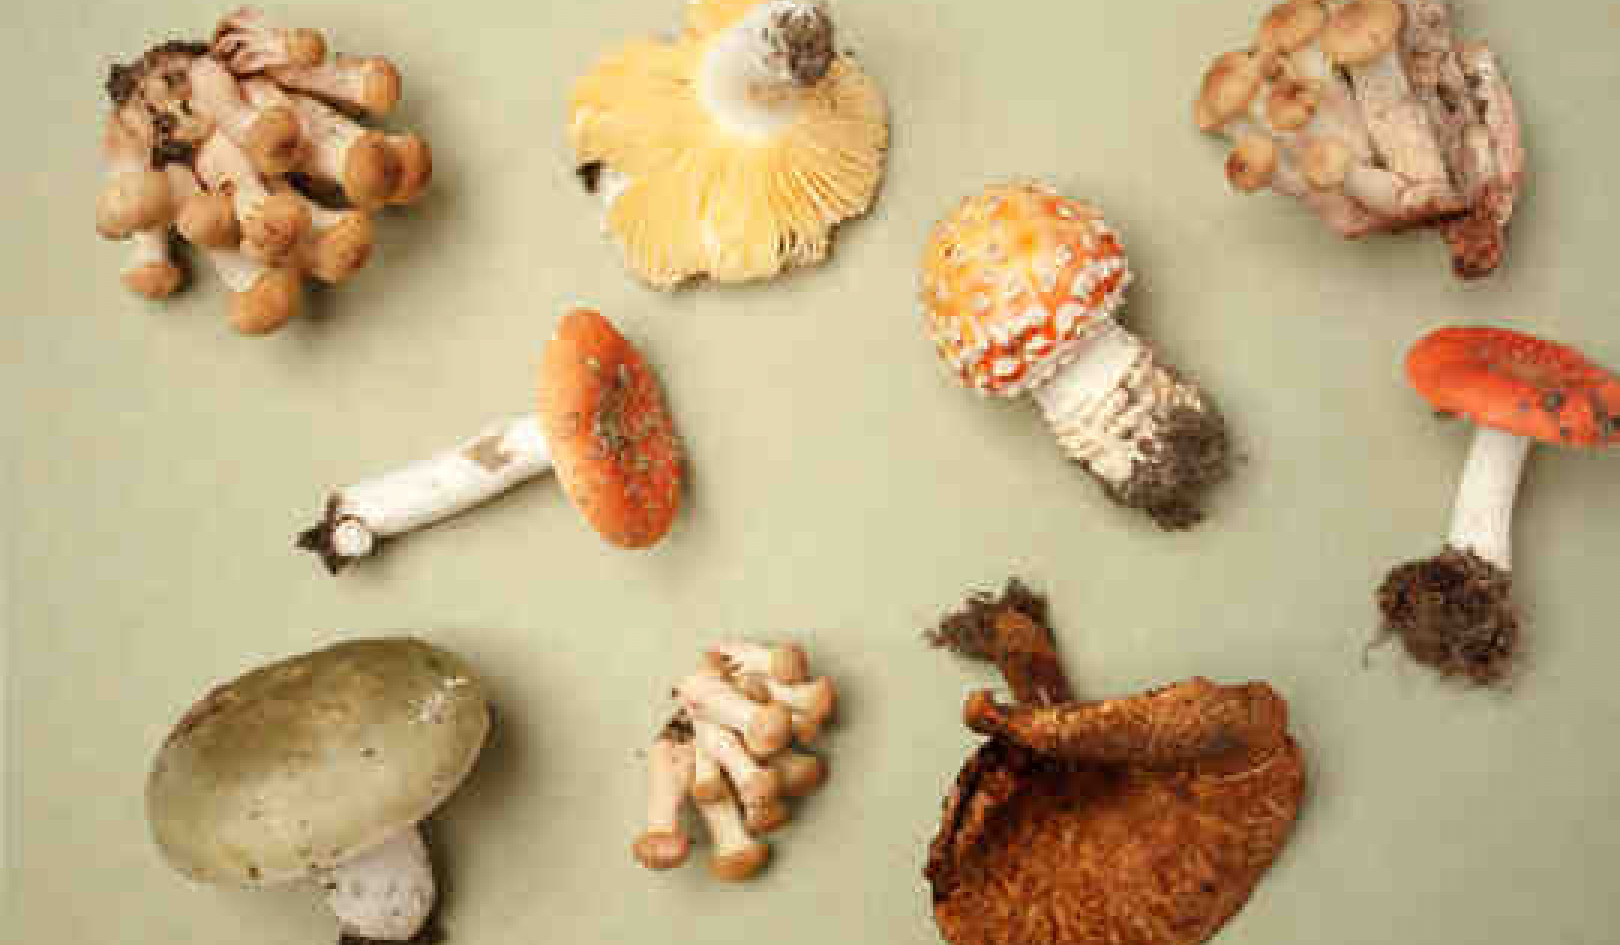 Why are some mushrooms poisonous?